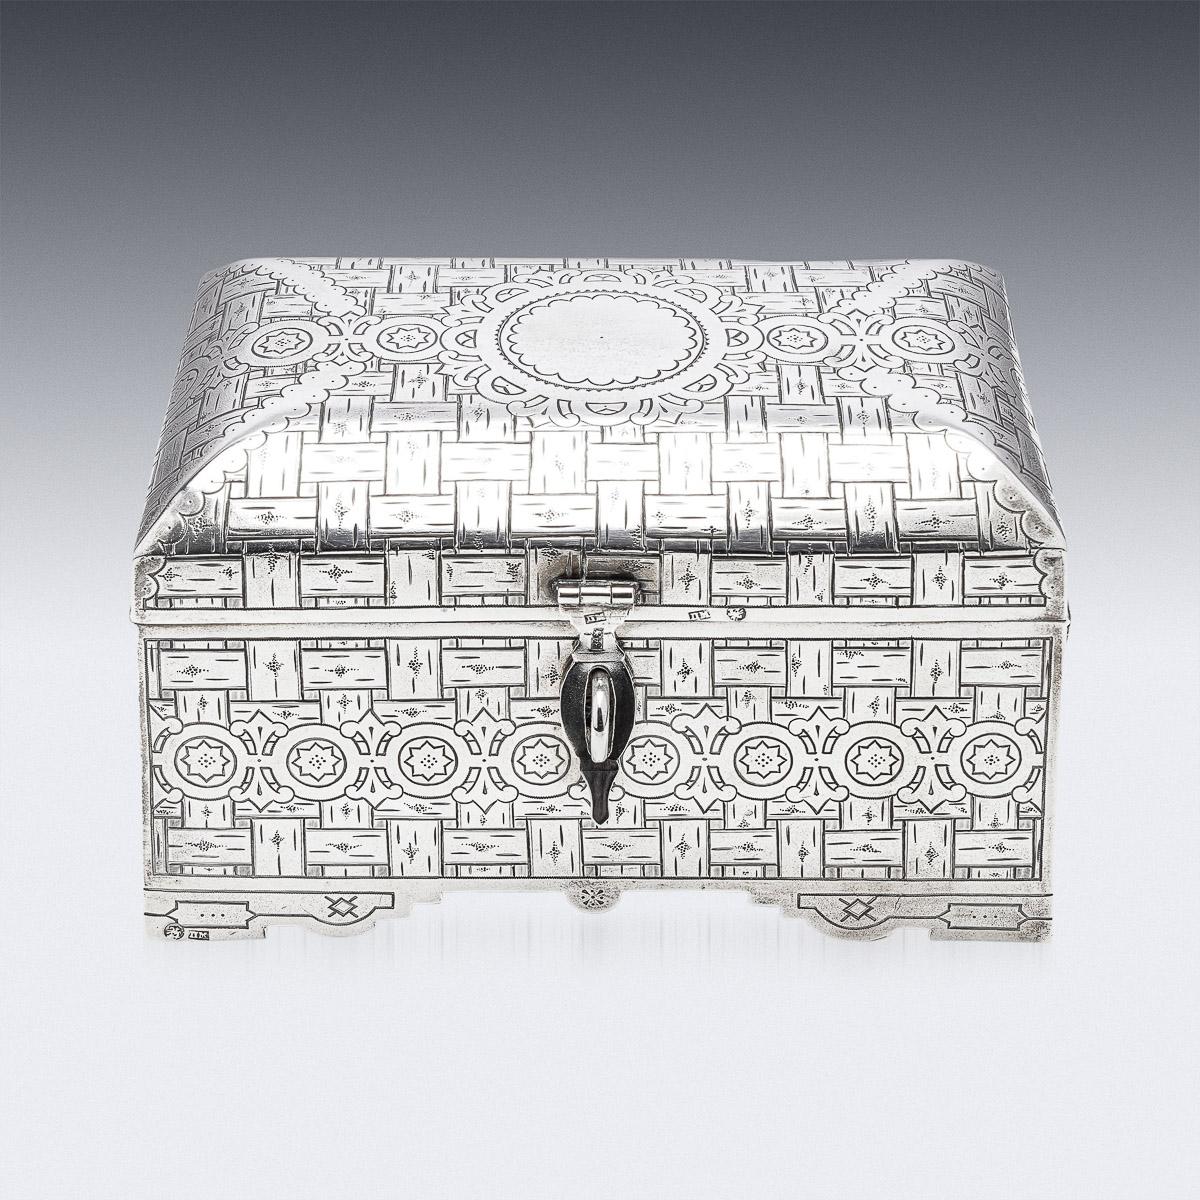 Antique 19th Century Imperial Russian solid silver trompe l'oeil box, rectangular casket shaped and with shaped hindged handles and lock, richly gilt interior. Hallmarked Russian Silver 84 (875 standard), Moscow, year 1891, Maker's mark in Cyrillic